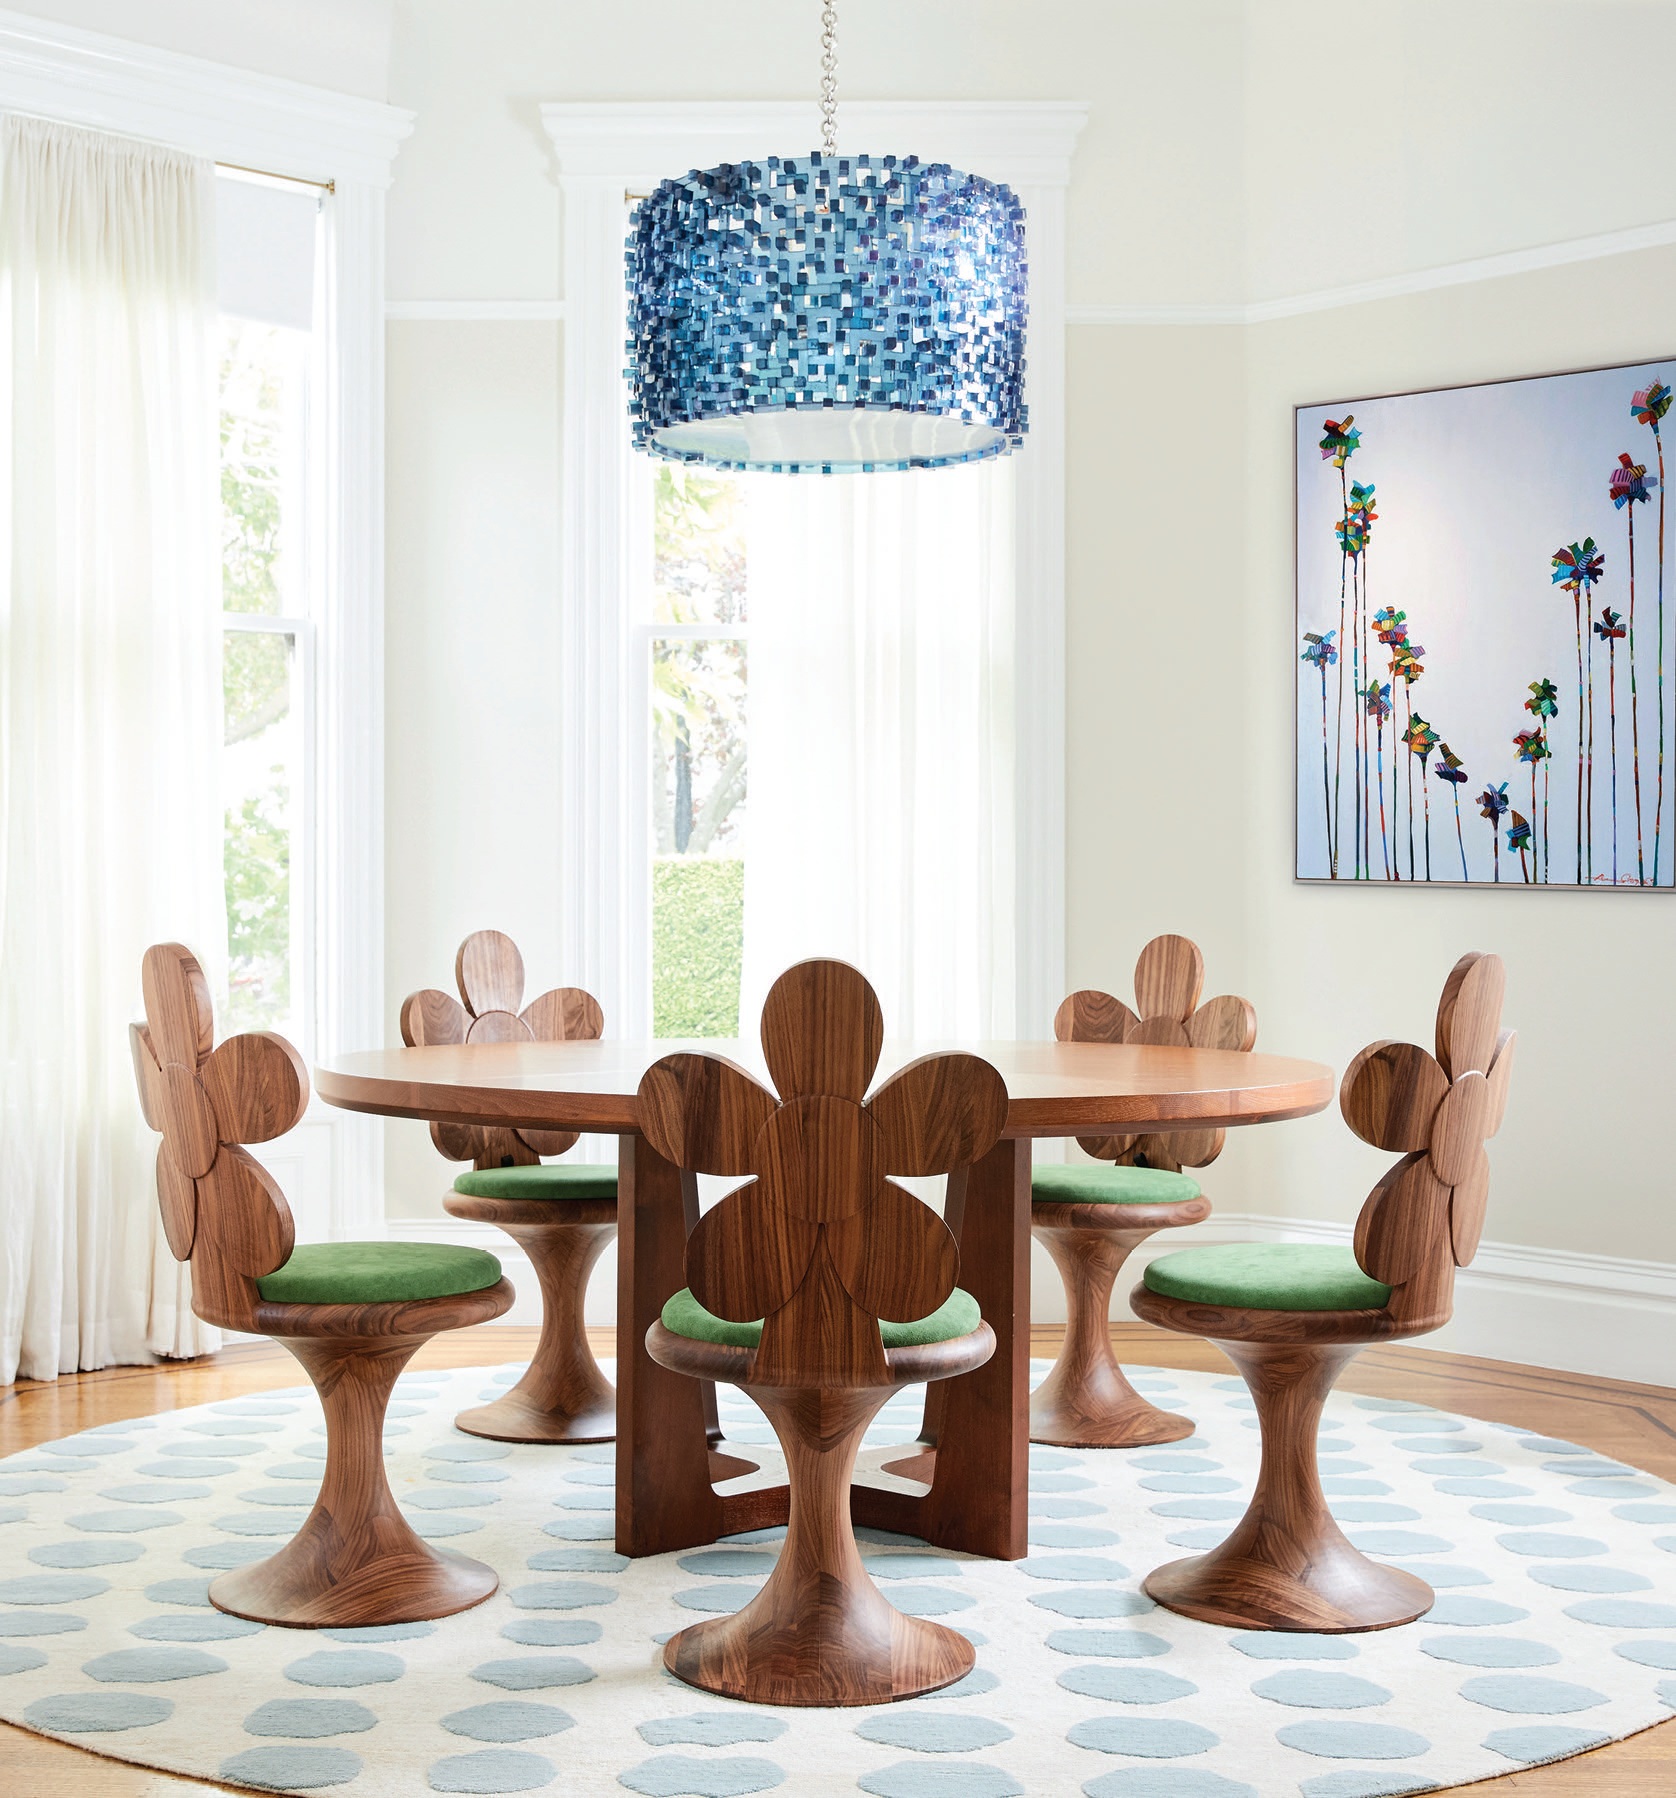 The new Daisy Doo chairs from Honeydudley come in a number of finishes. PHOTO BY JOHN MERKL